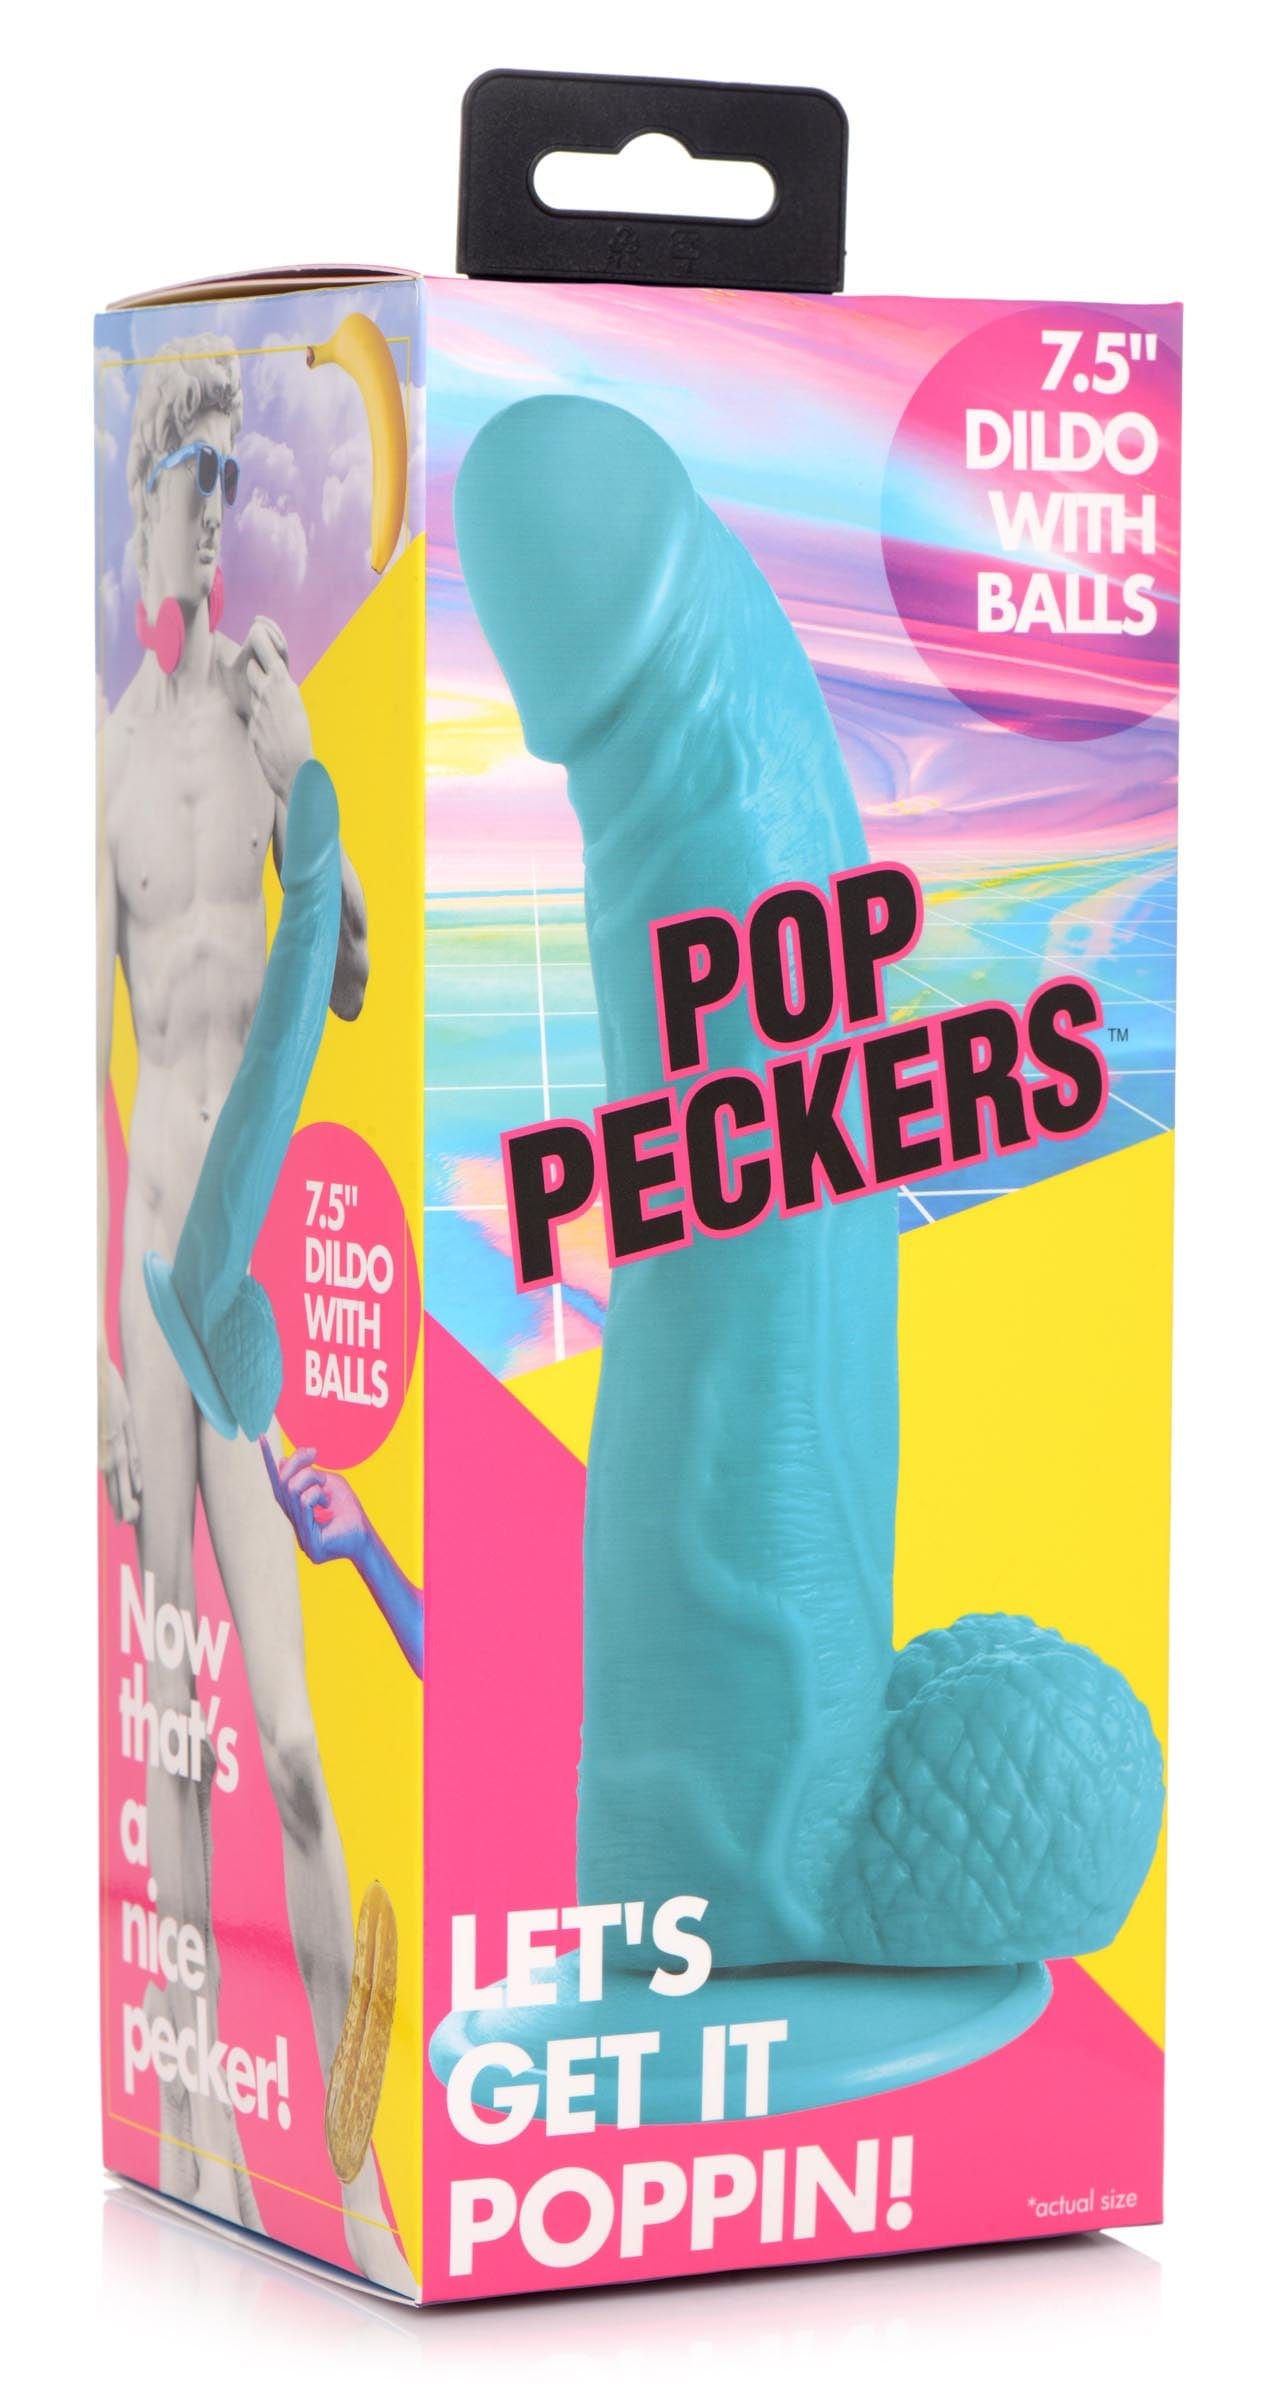 Pop Peckers Realistic Dildo Blue Pop Peckers 7.5" Dildo with Balls at the Haus of Shag